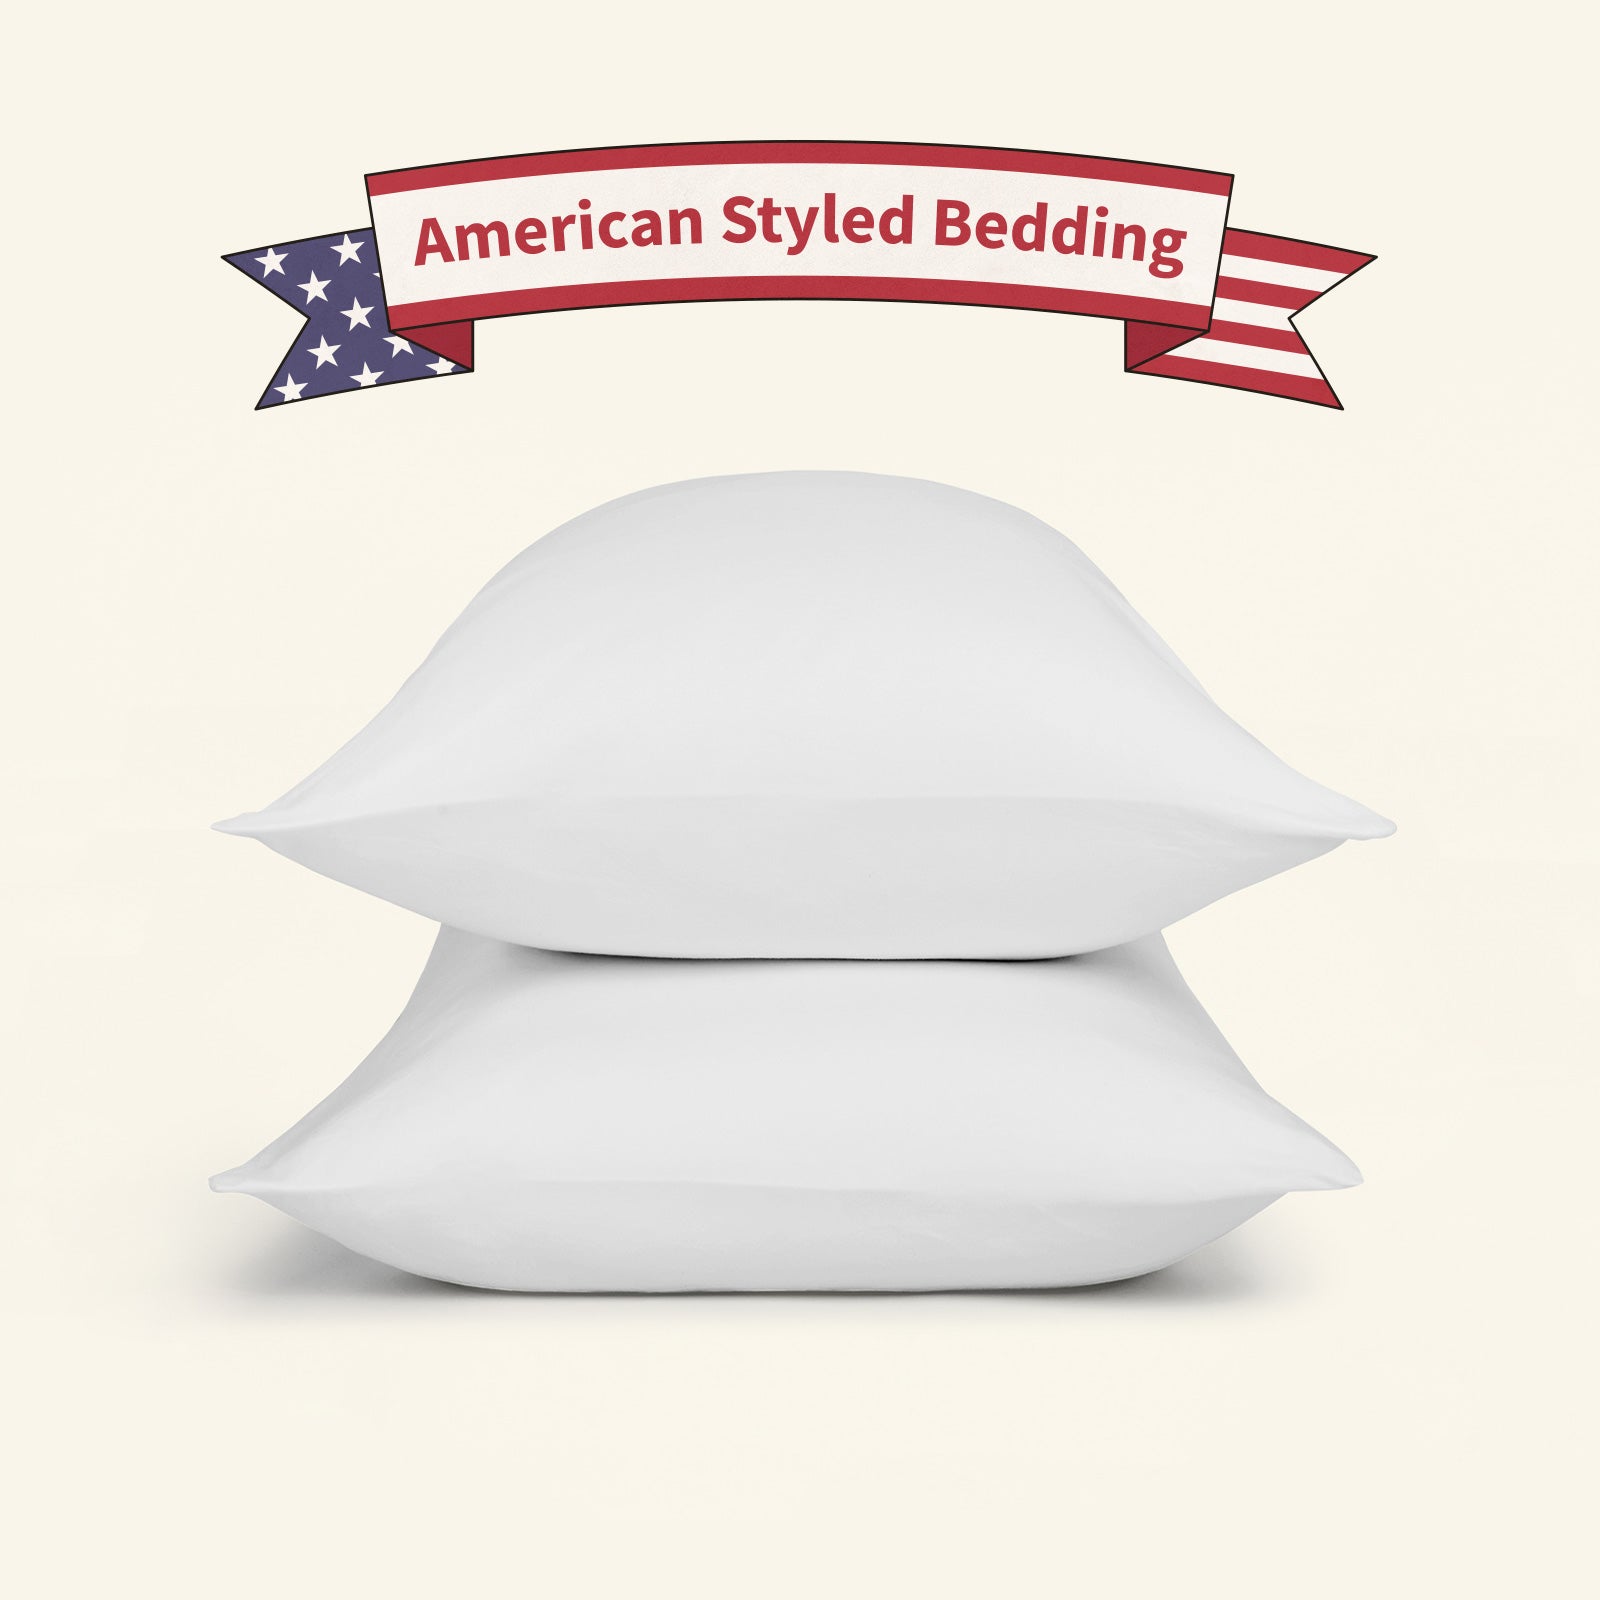 Pillow Case Core for the UltraCool Pillow-American Styled Bedding from Slumber Cloud